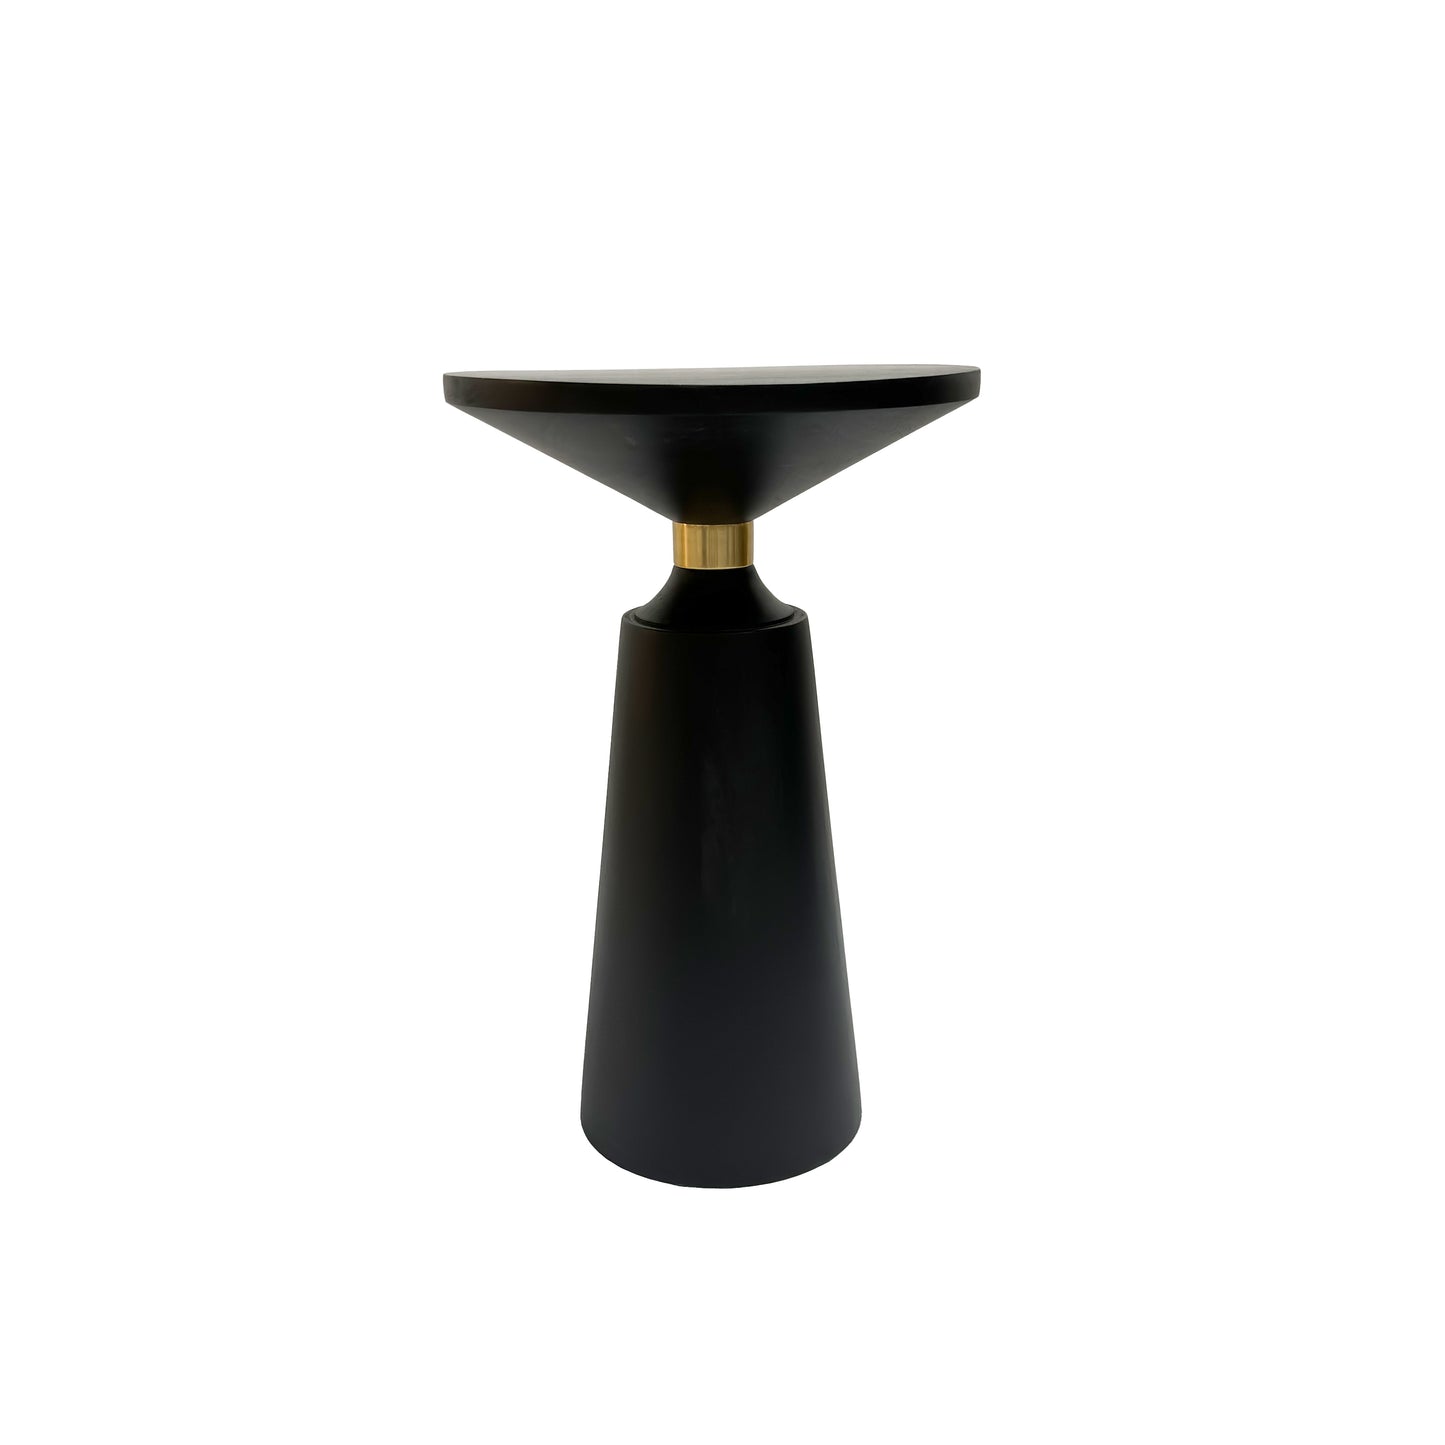 Fawn 20 Inch Side End Table, Black Mango Wood Round Top with Pedestal Base, Shiny Brass Support The Urban Port